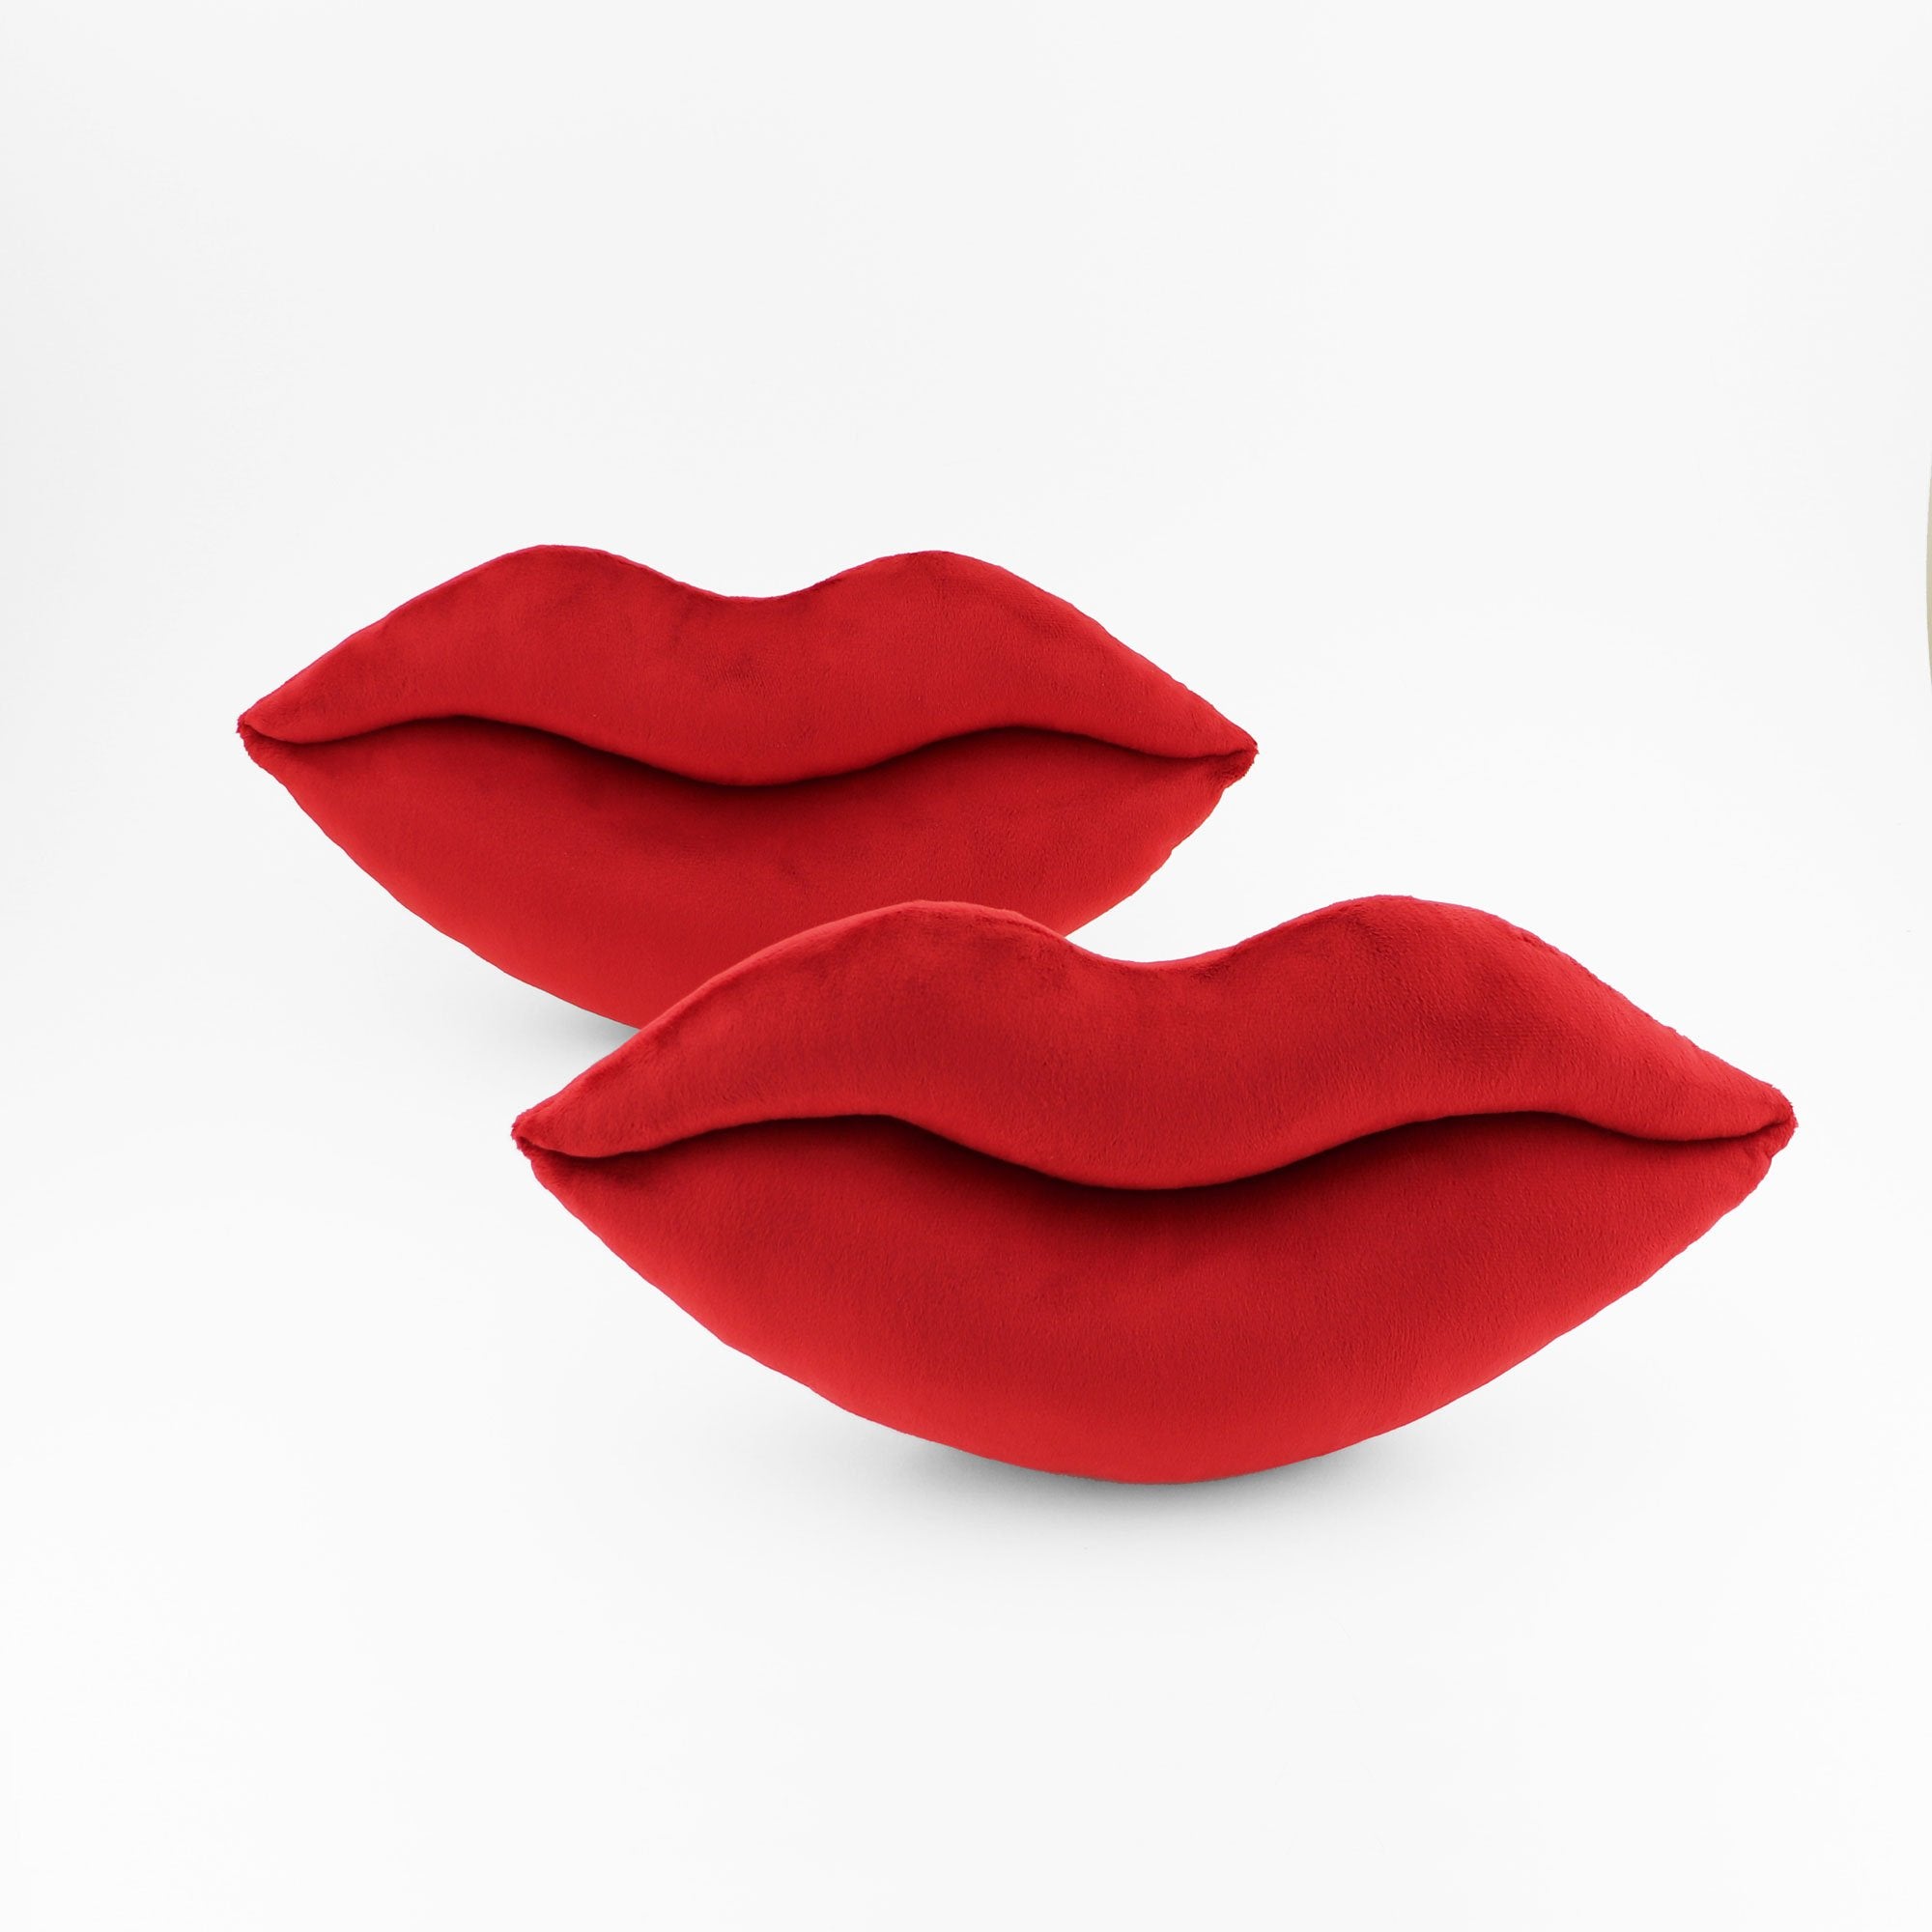 Another pair of crimson red lips shaped decorative pillows.